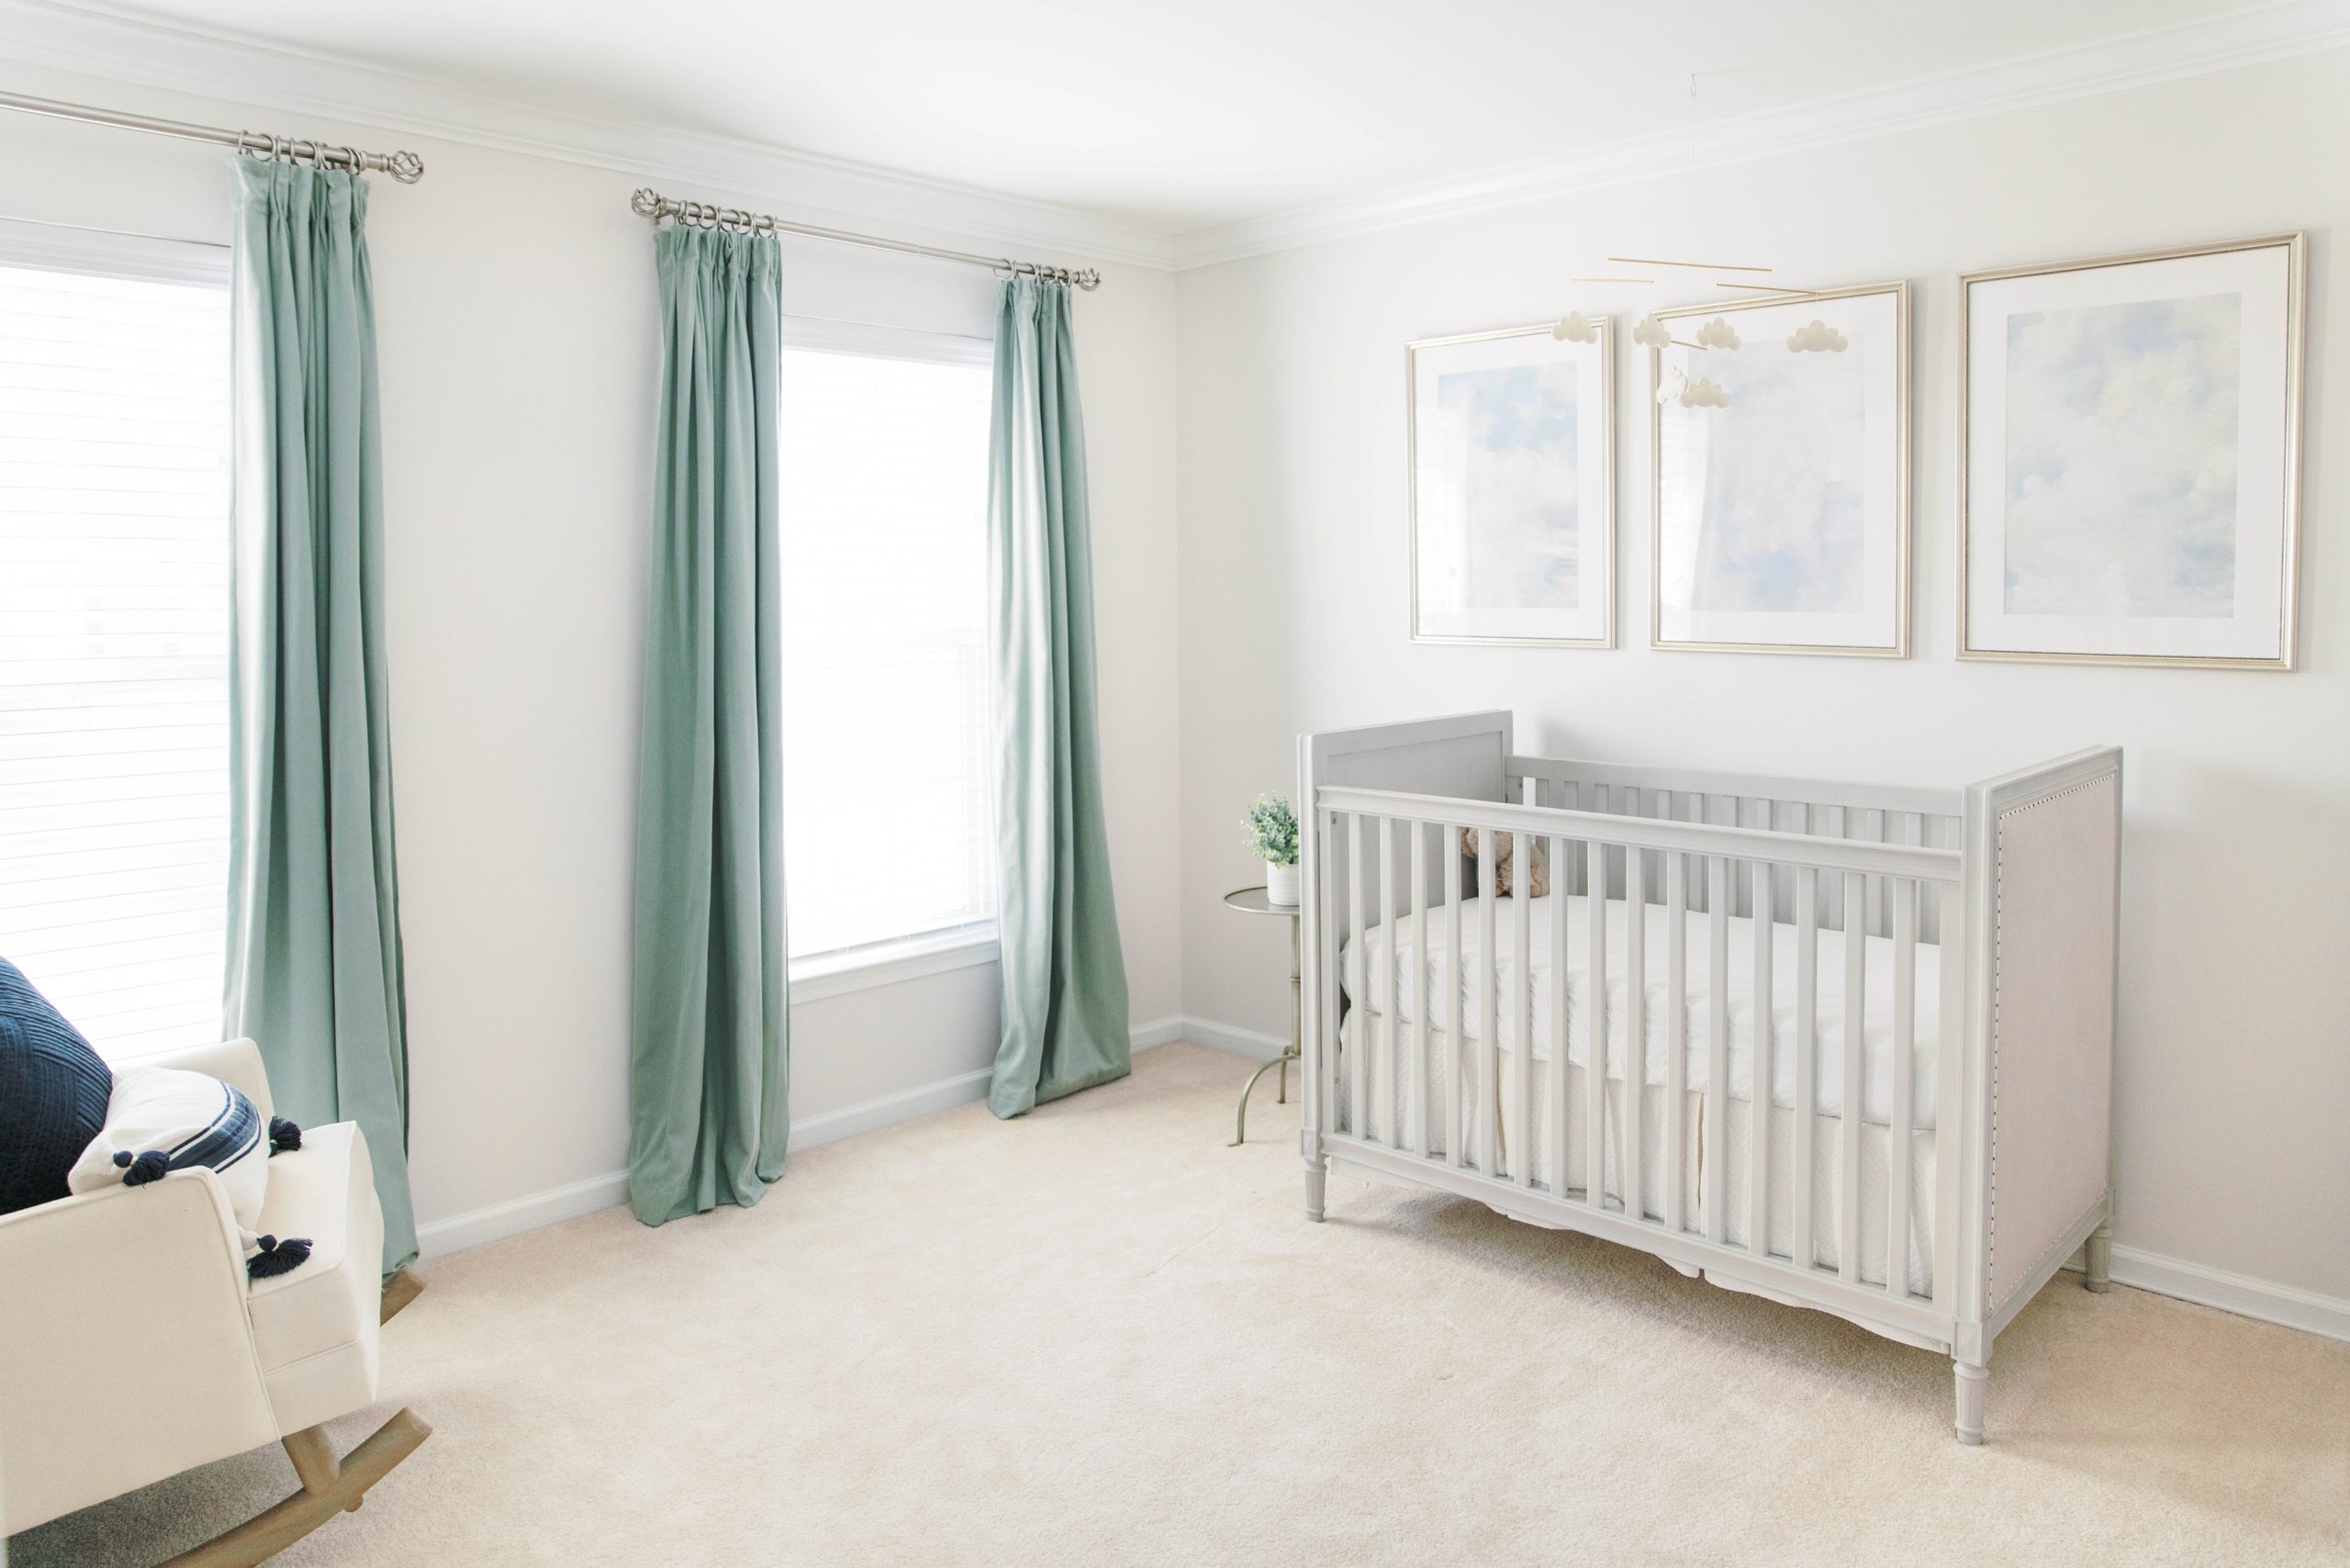 A subtle and elegant travel themed nursery with furniture from the Marcelle collection at Restoration Hardware.